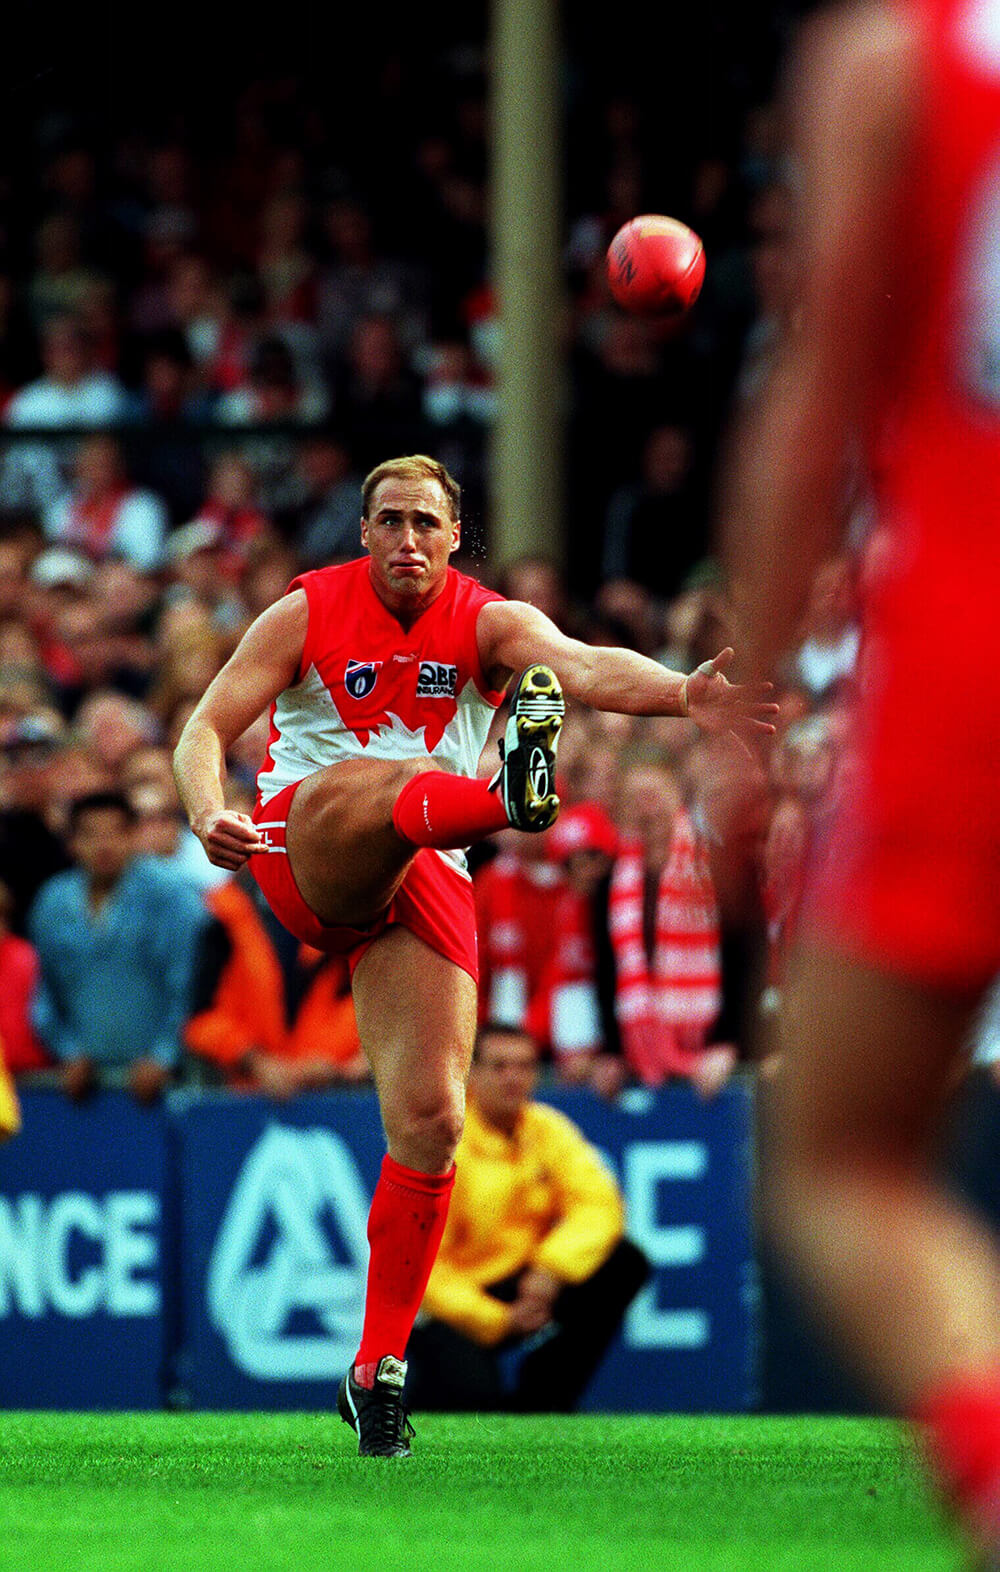 Tony ‘Plugger’ Lockett’s 1300th record goal photographed by Phil Hillyard